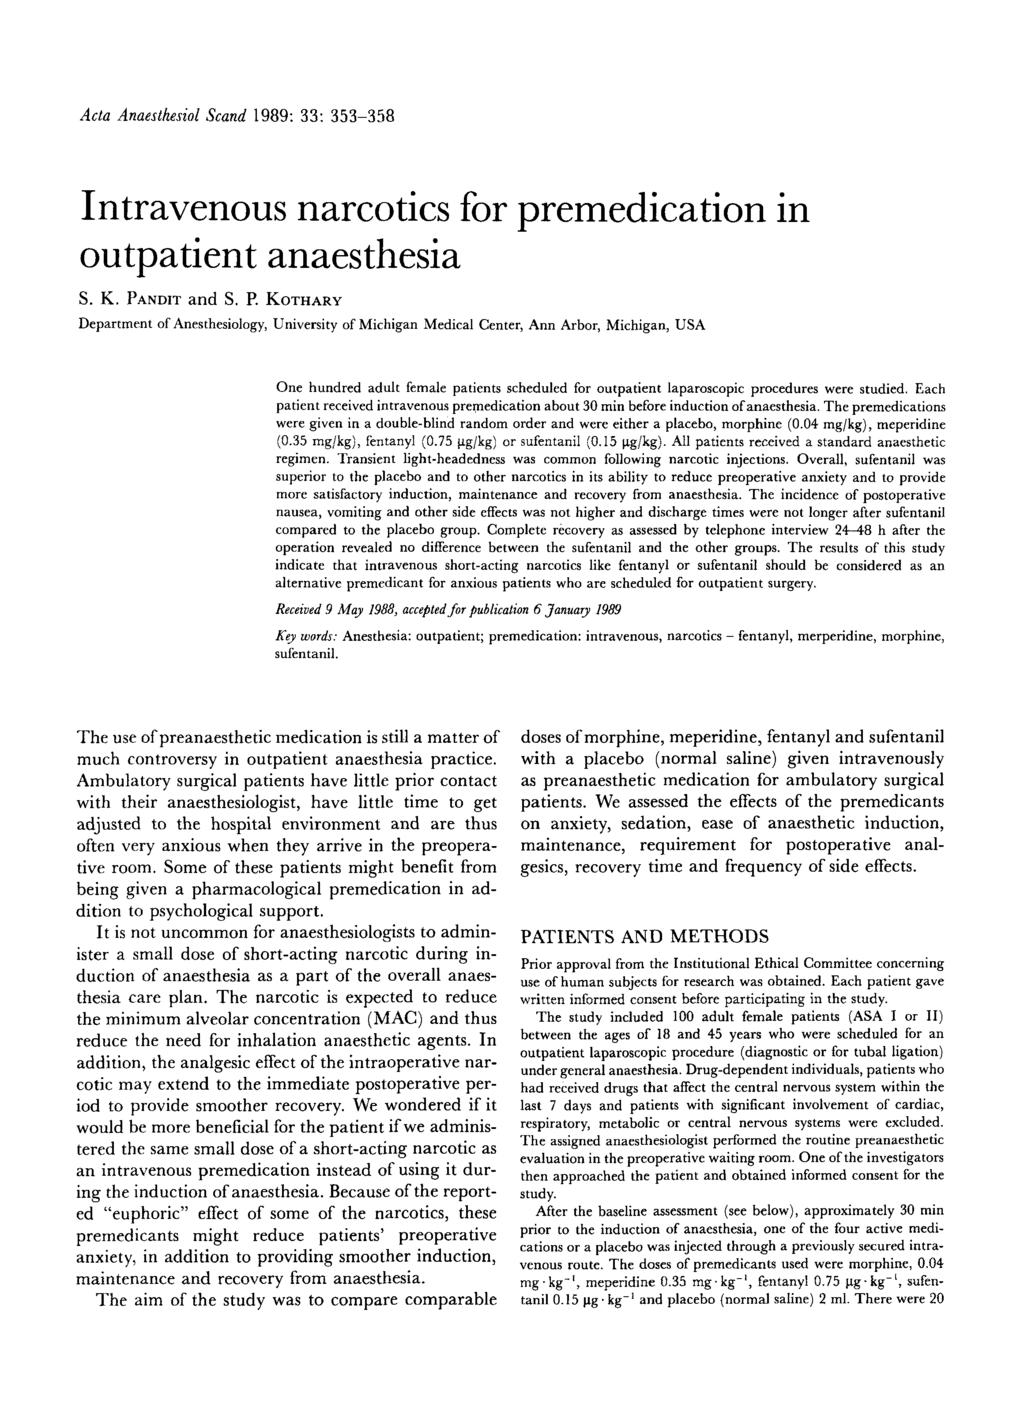 Acta Anaesthesiol Scand 1989: 33: 353-358 Intravenous narcotics for premedication in outpatient anaesthesia S. K. PA